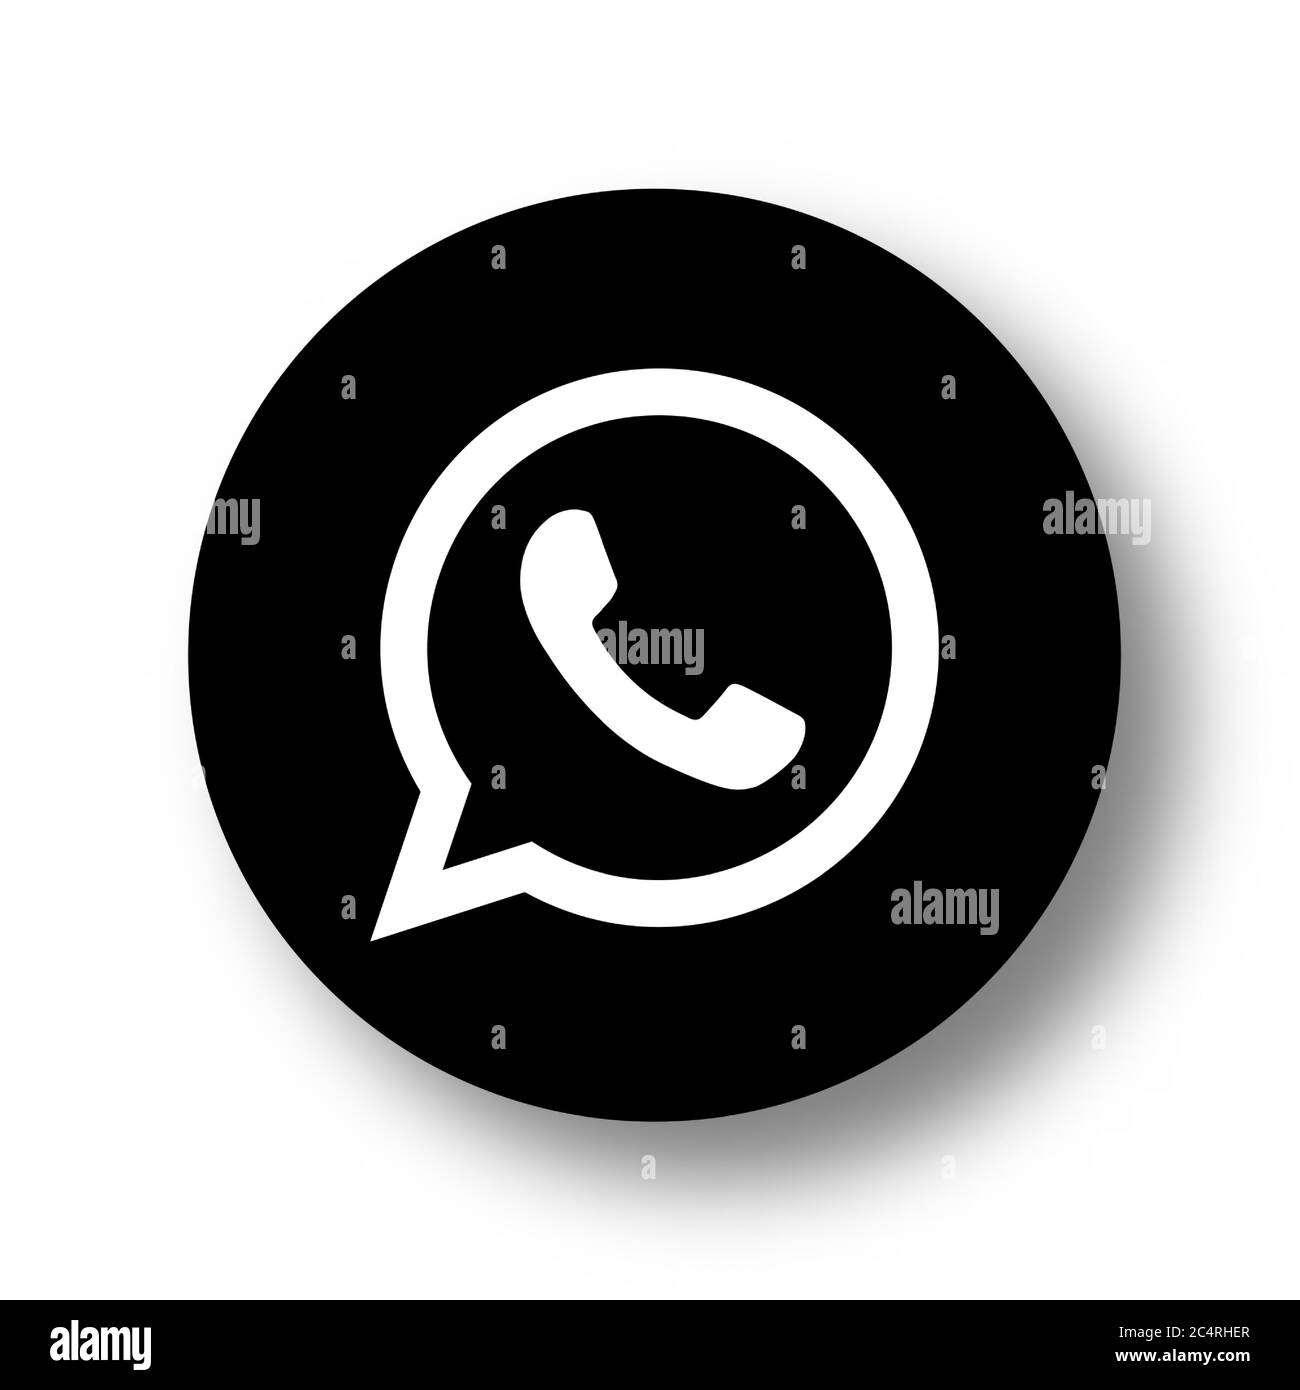 VORONEZH, RUSSIA - JANUARY 31, 2020: Whatsapp logo black round icon with soft shadow Stock Vector